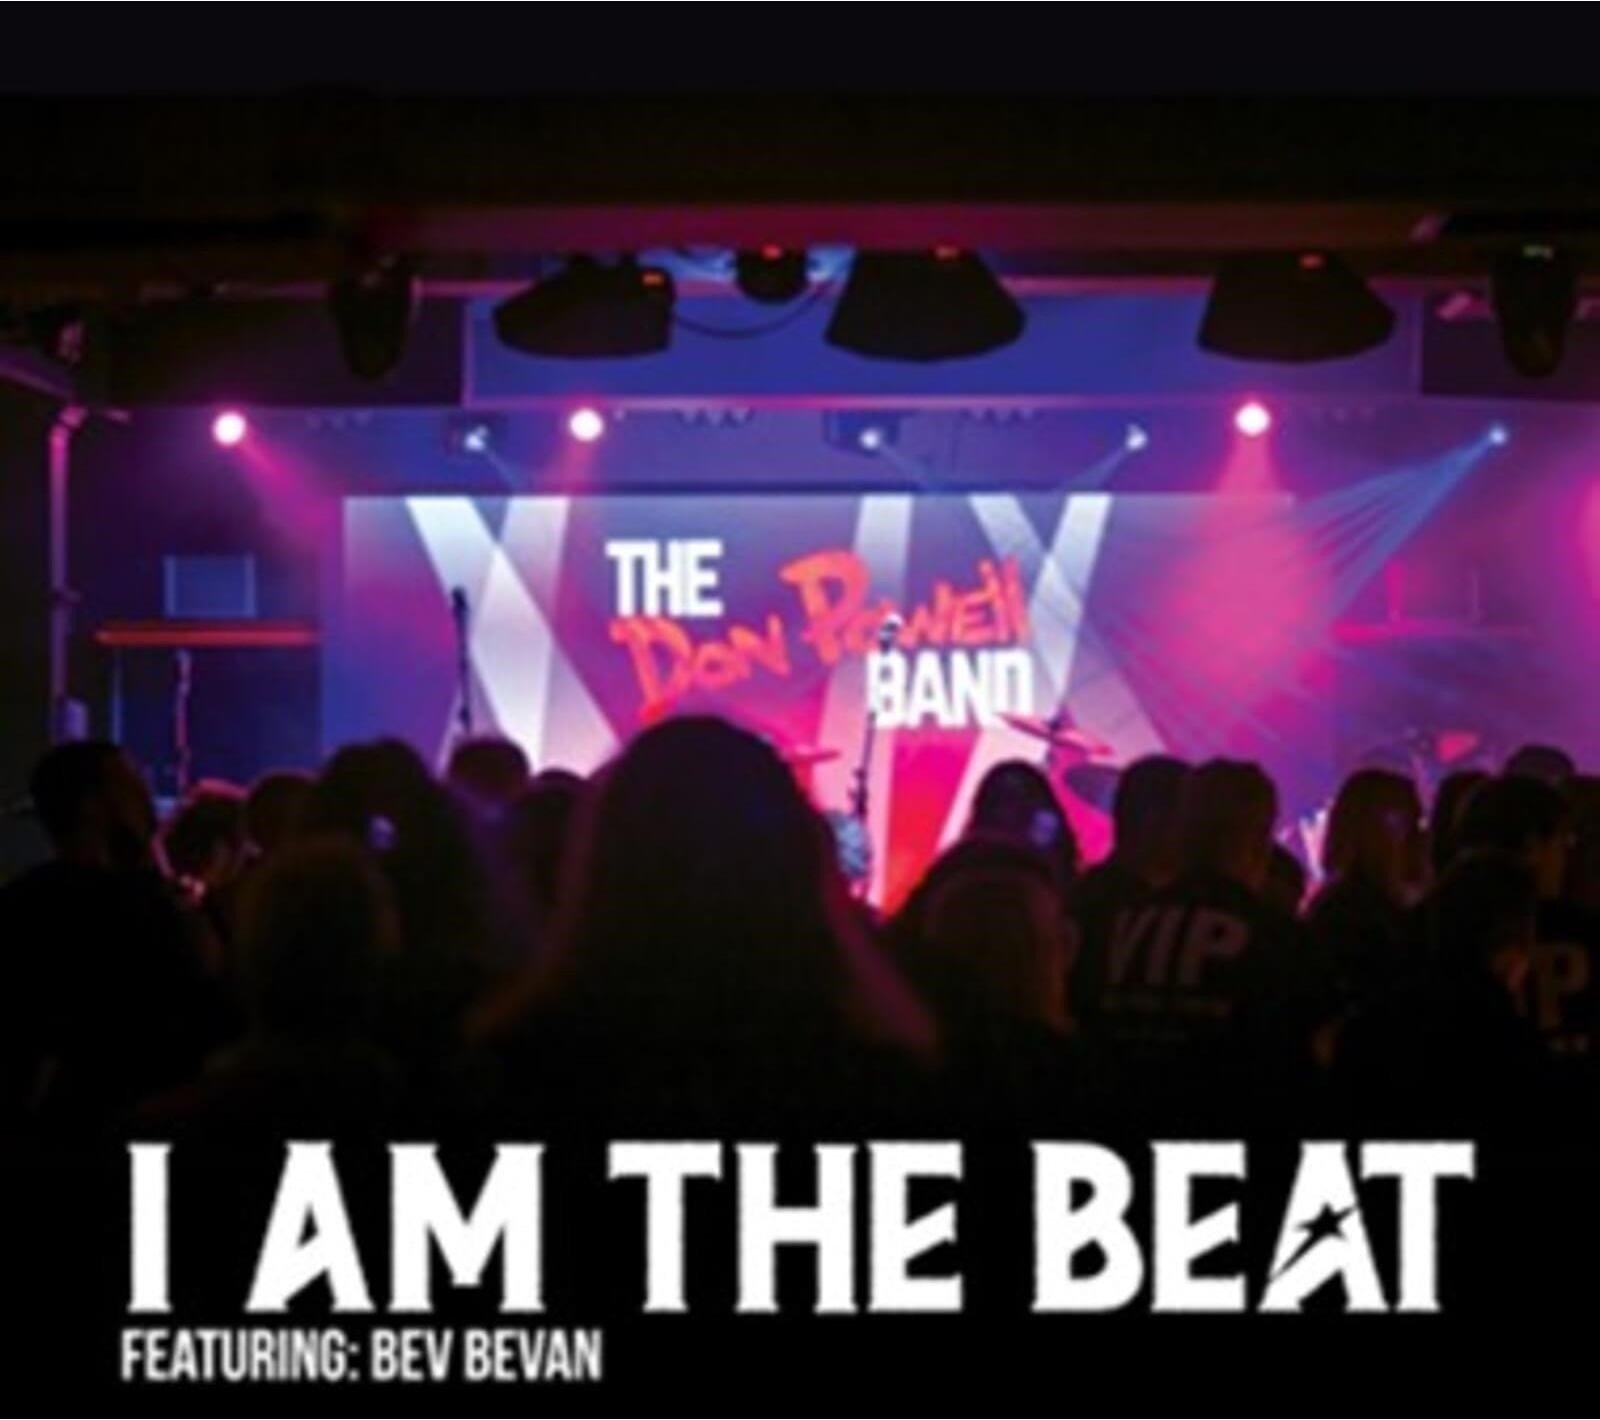 CD Shop - I AM THE BEAT THE DON POWELL BAND FEATURING BEV BEVAN